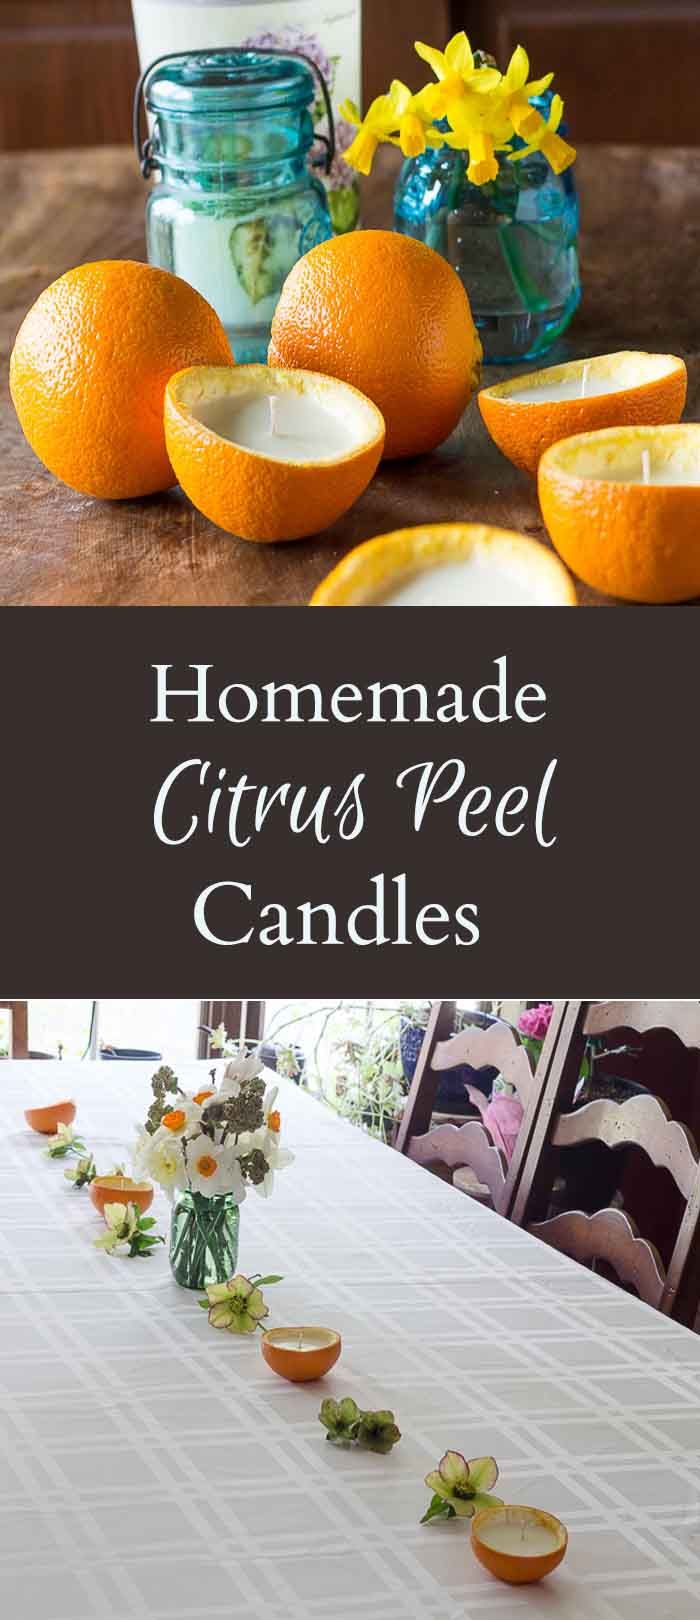 Learn how to make homemade candles with real orange rinds, wax and essential oil...